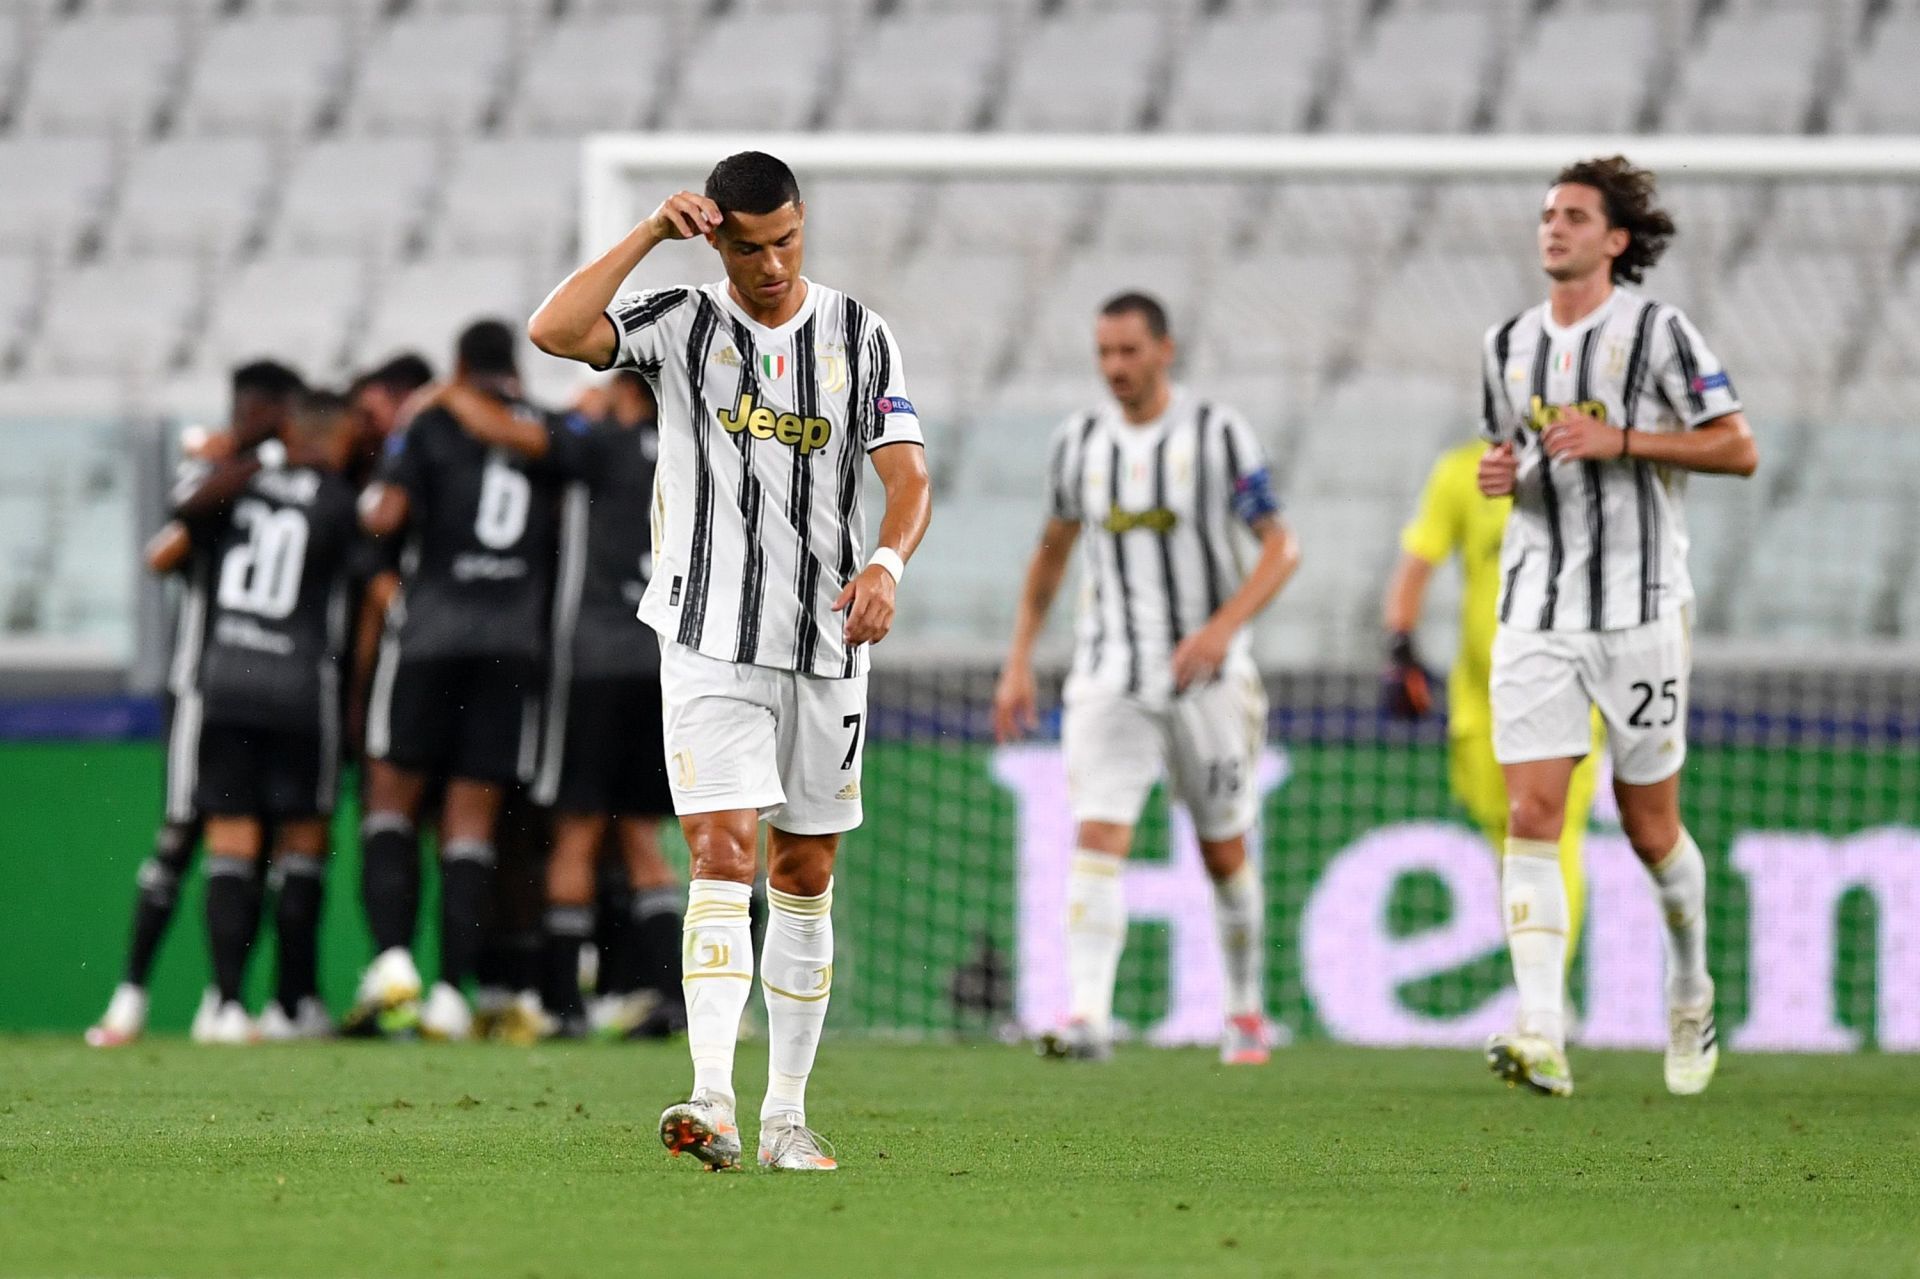 Juventus have struggled in European competitions